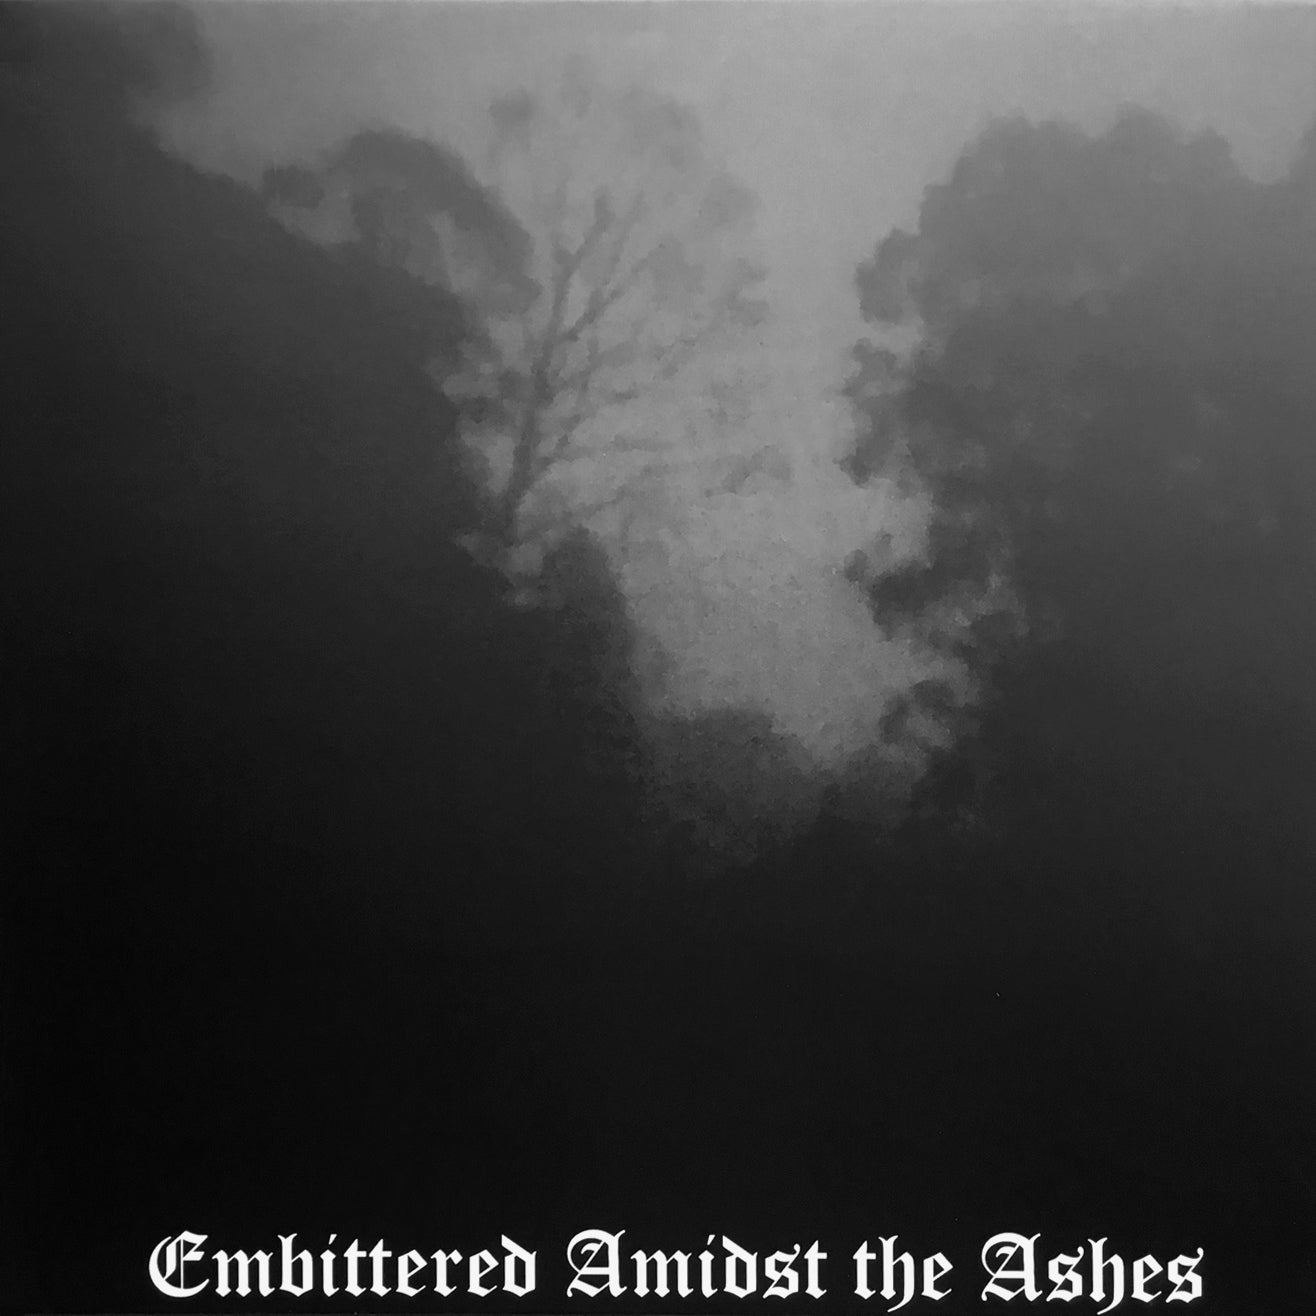 CARVED CROSS - EMBITTERED AMIDST THE ASHES Vinyl LP